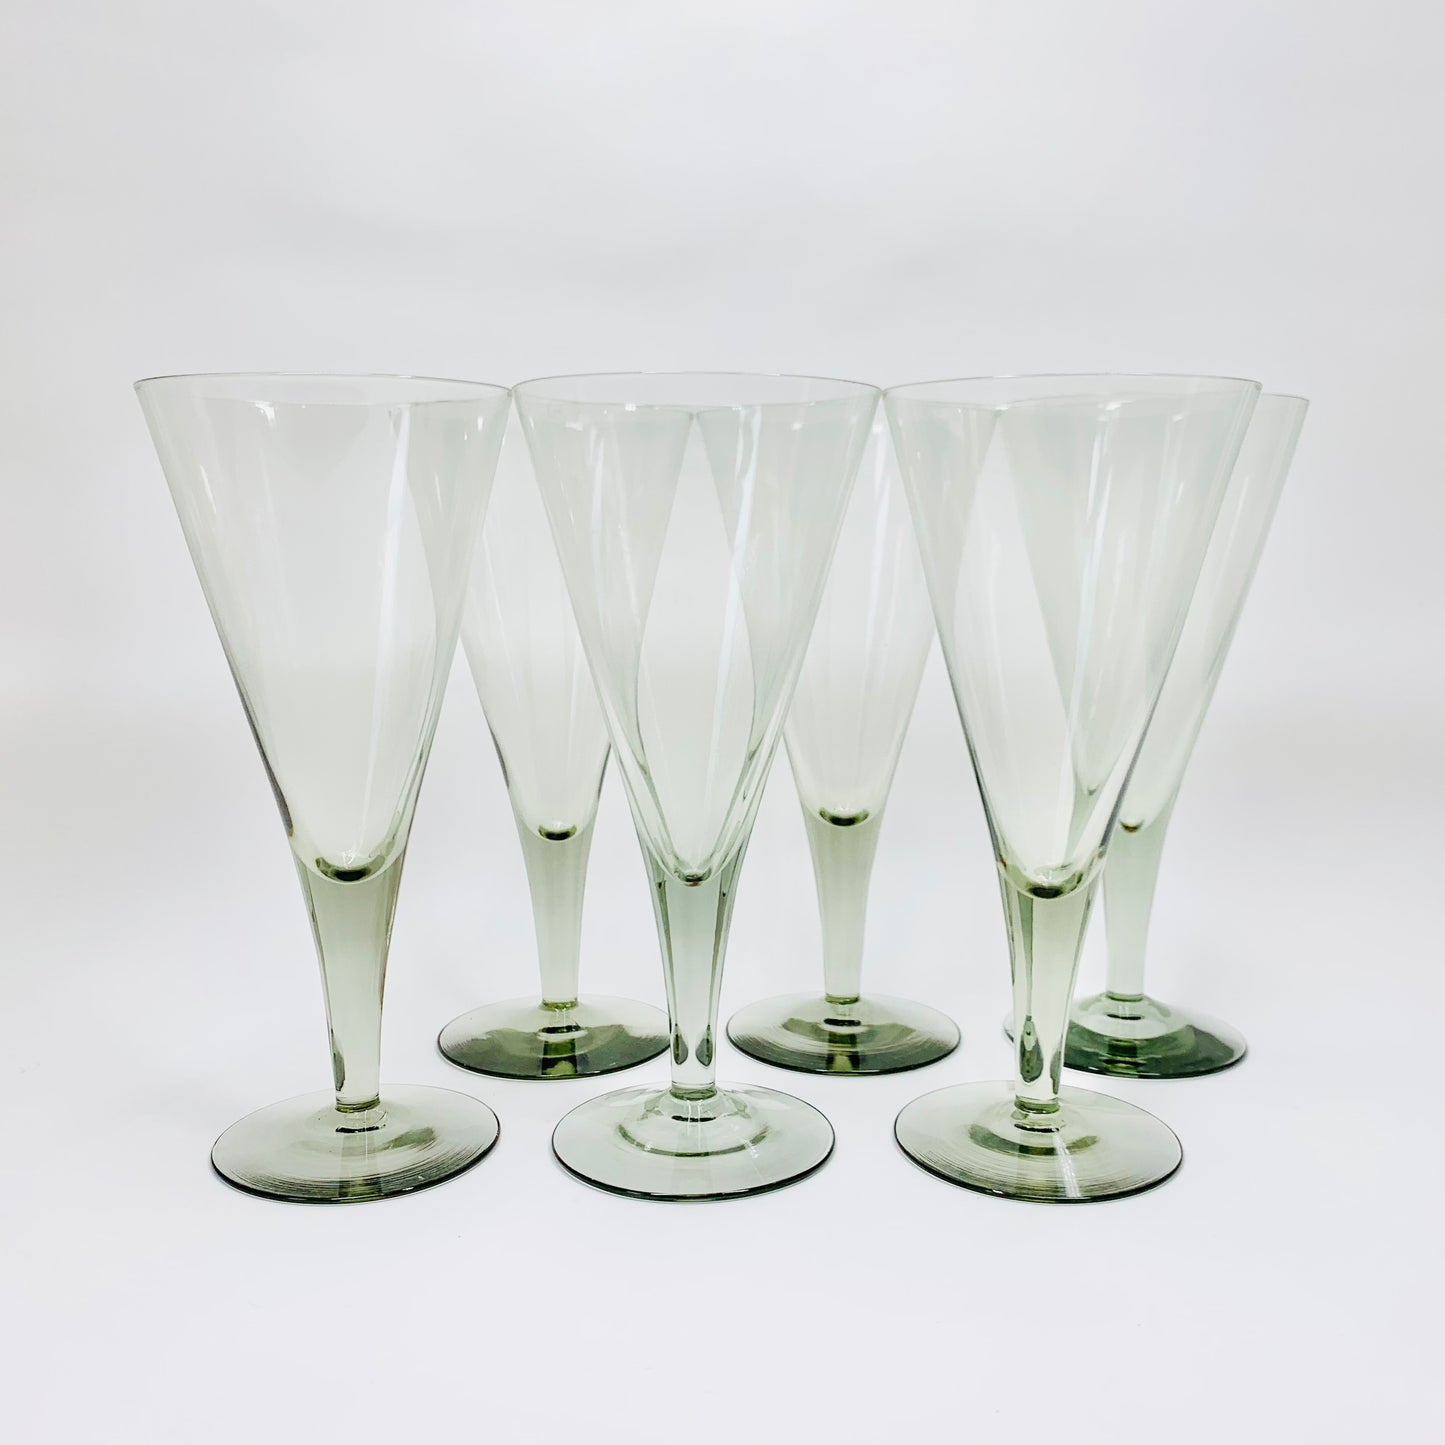 Extremely rare MCM Orrefors large grey schnapps/wine glasses